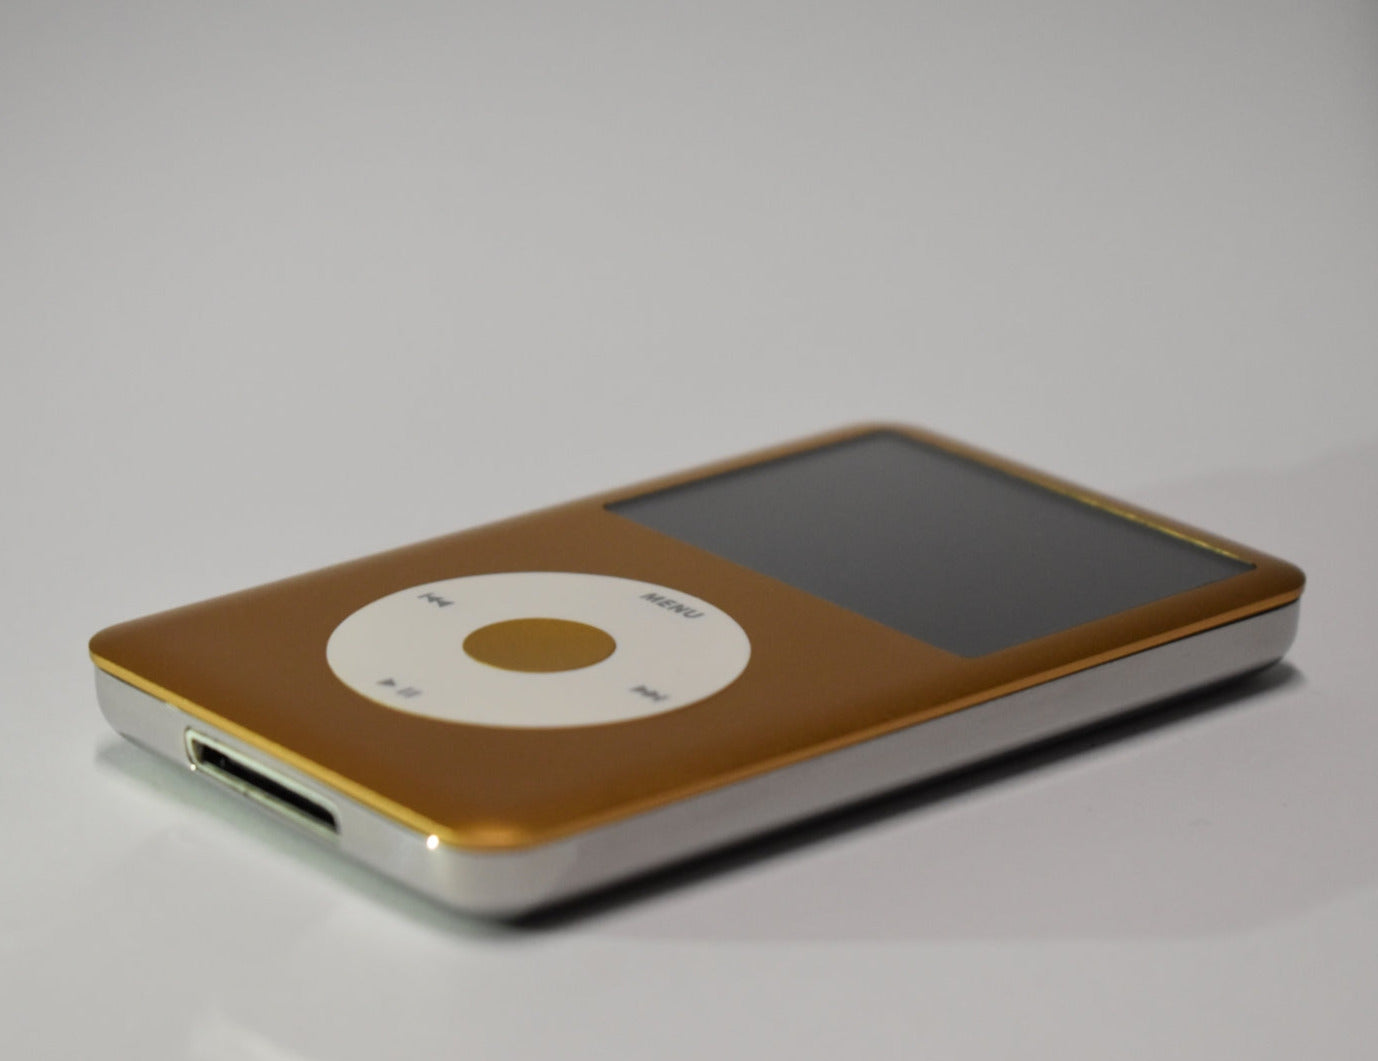 iPod classic - Gold and White | Flash Storage and Extended Battery